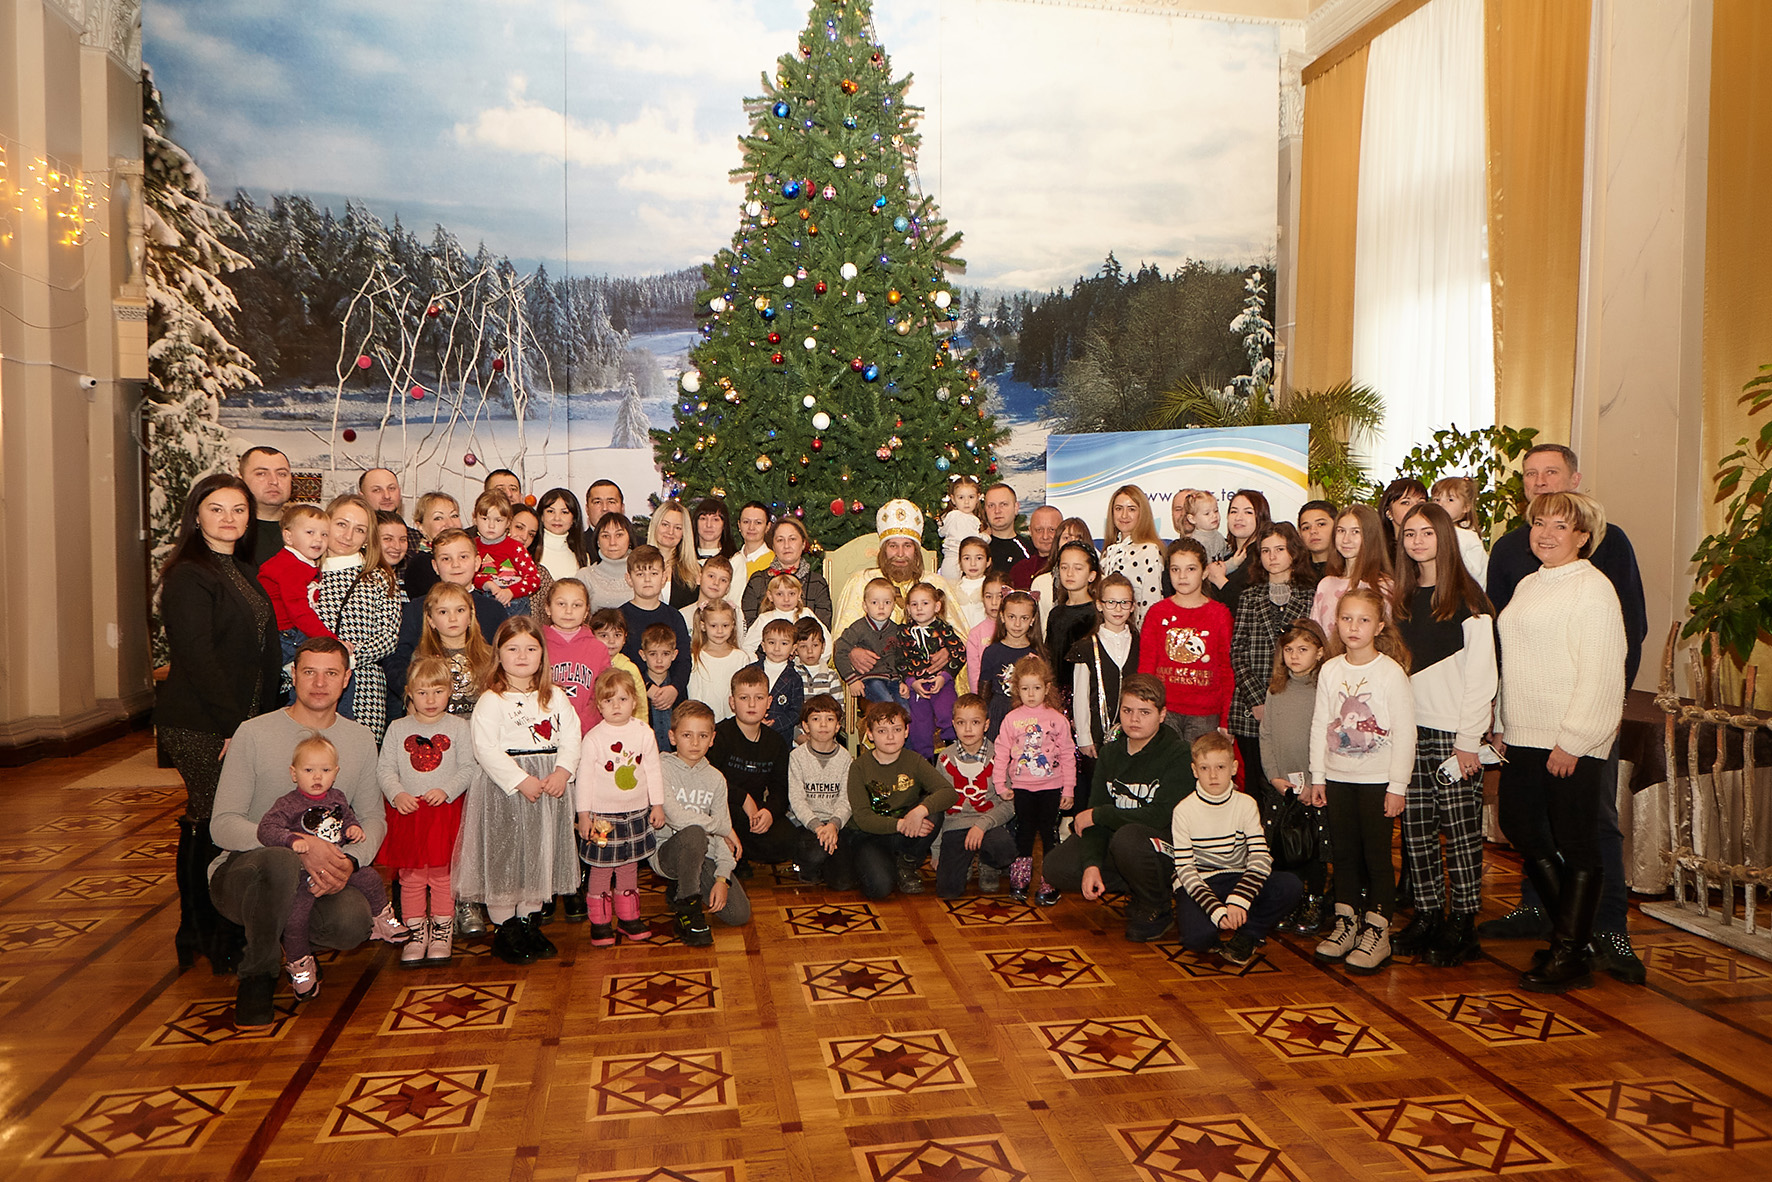 The first night of the play “The Snow Queen” on the occasion of St. Nicholas Day